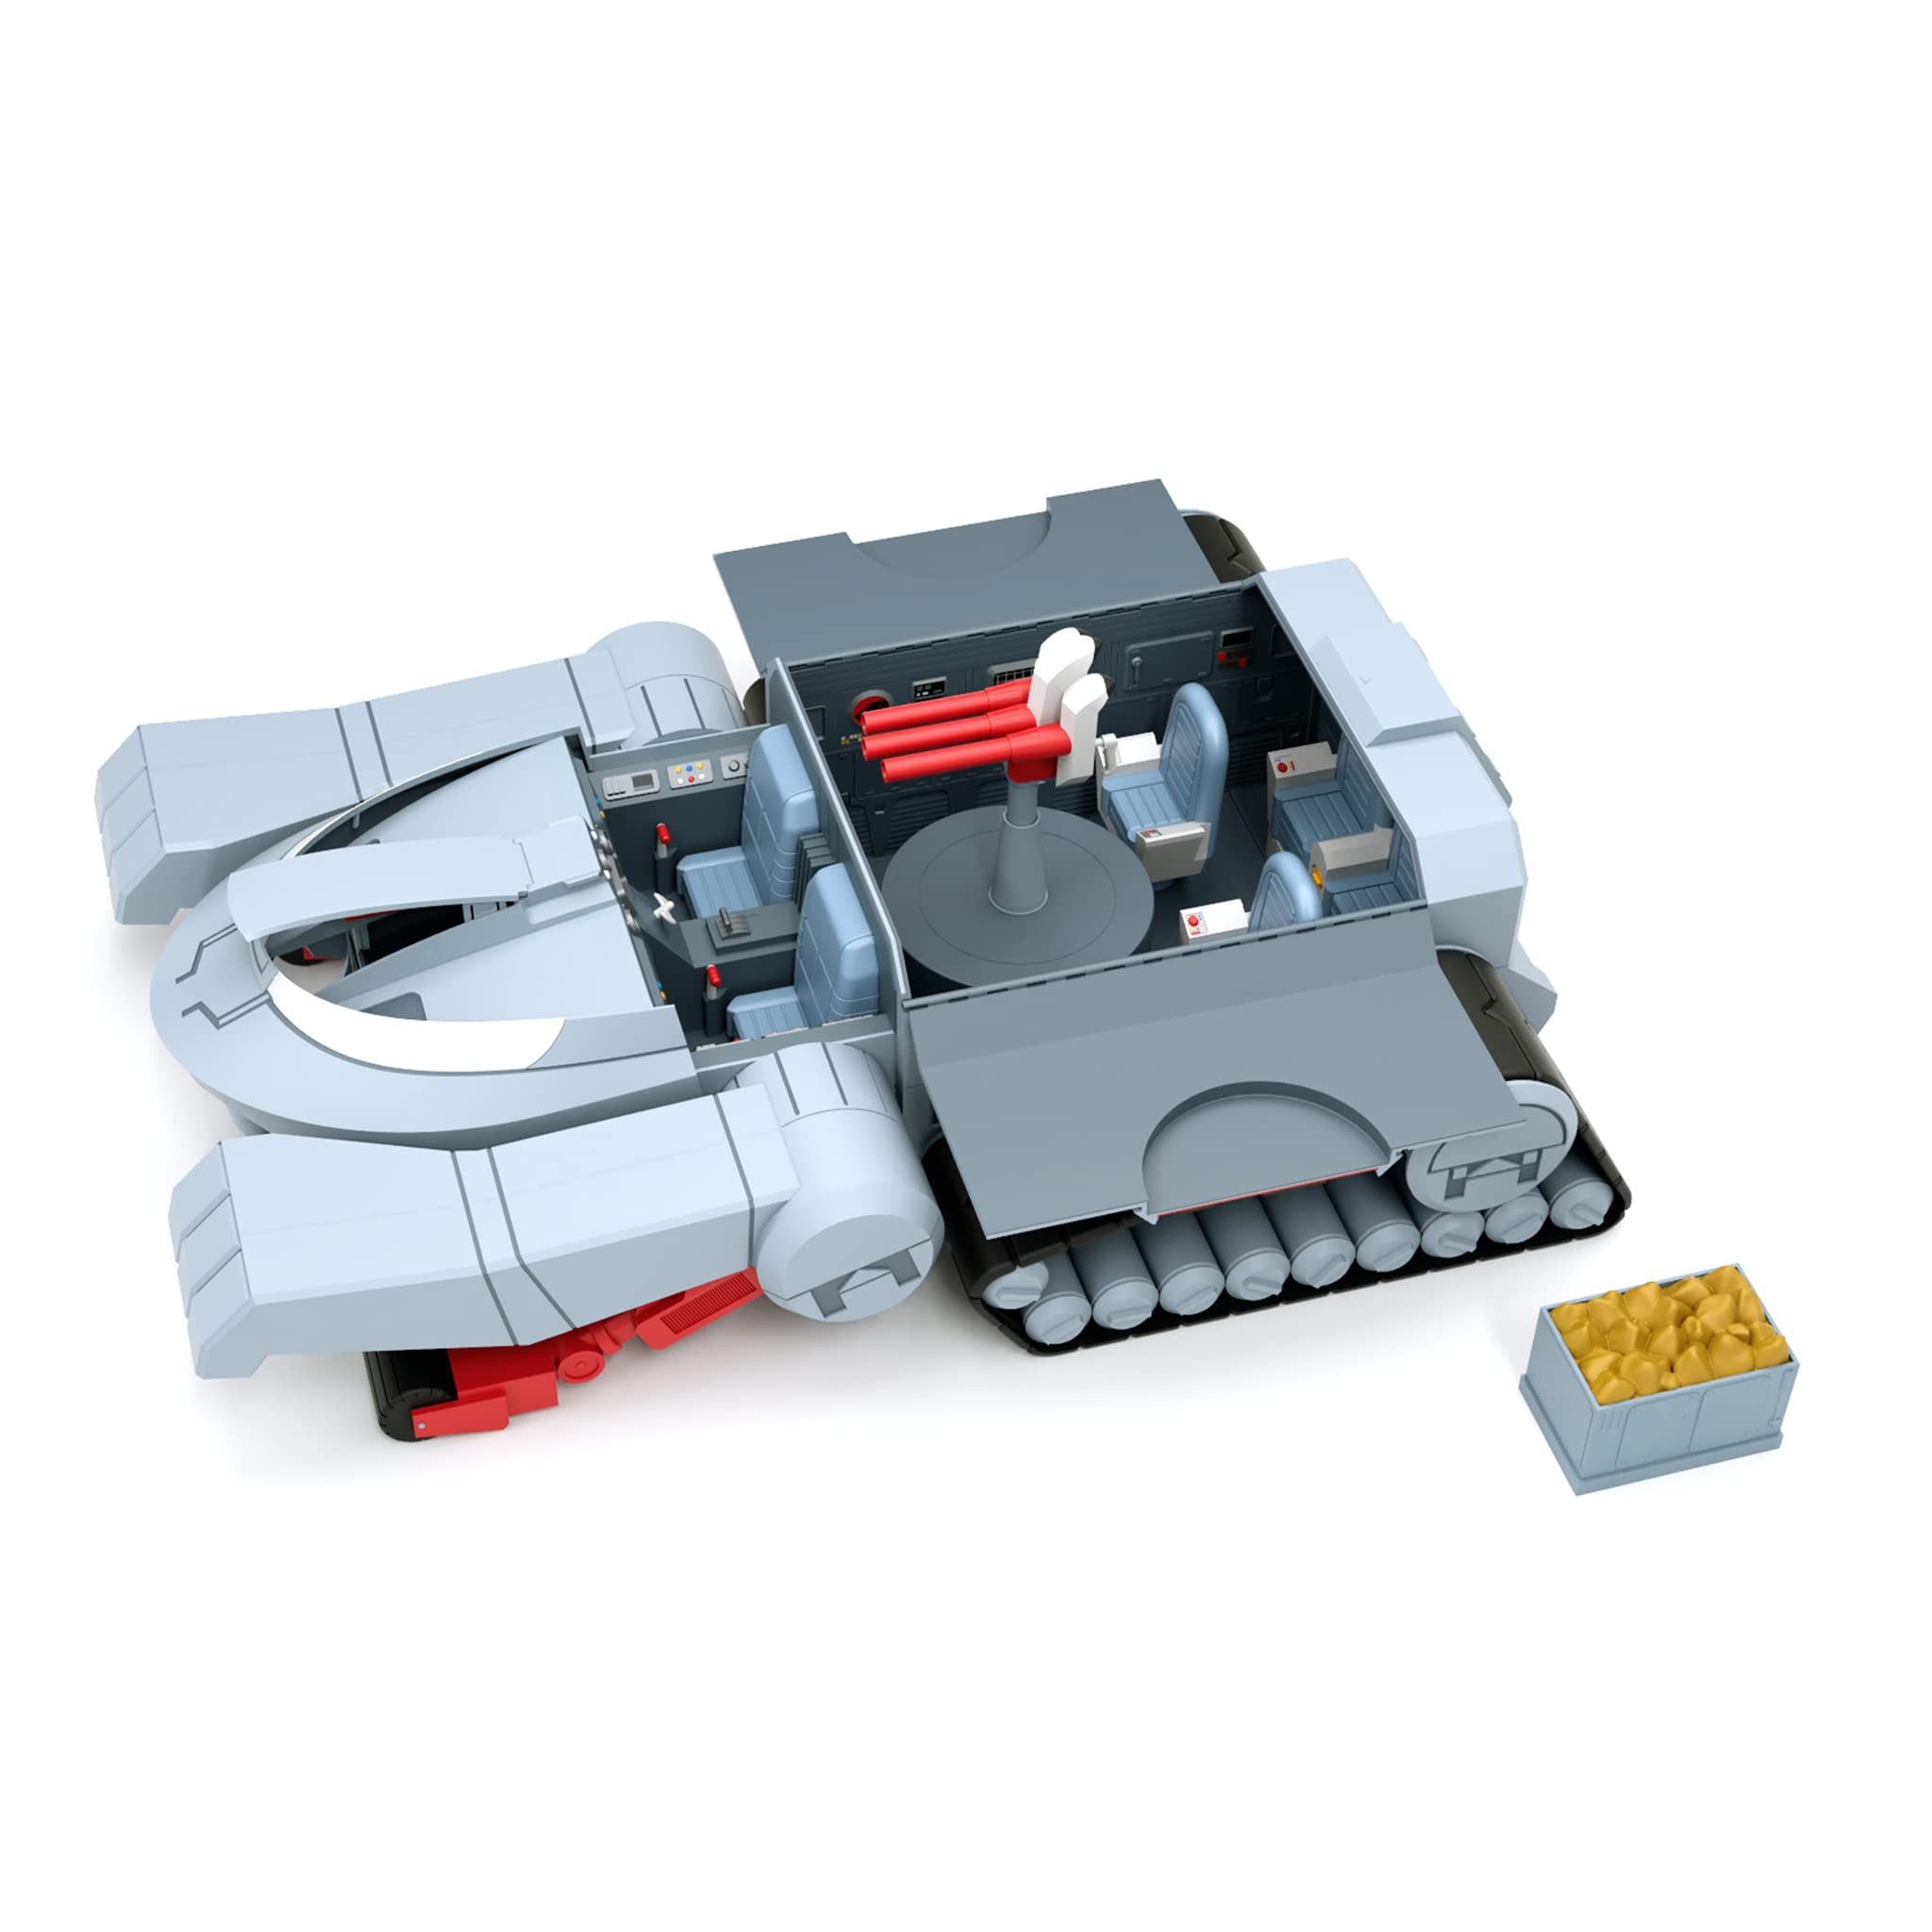 Super7 Thundercats ThunderTank - 27 in ULTIMATES! Vehicle - Features Cartoon Accurate Details, Battle Mode Transformations, and Accessories, Holds Up to Six 7in Thundercats Action Figures